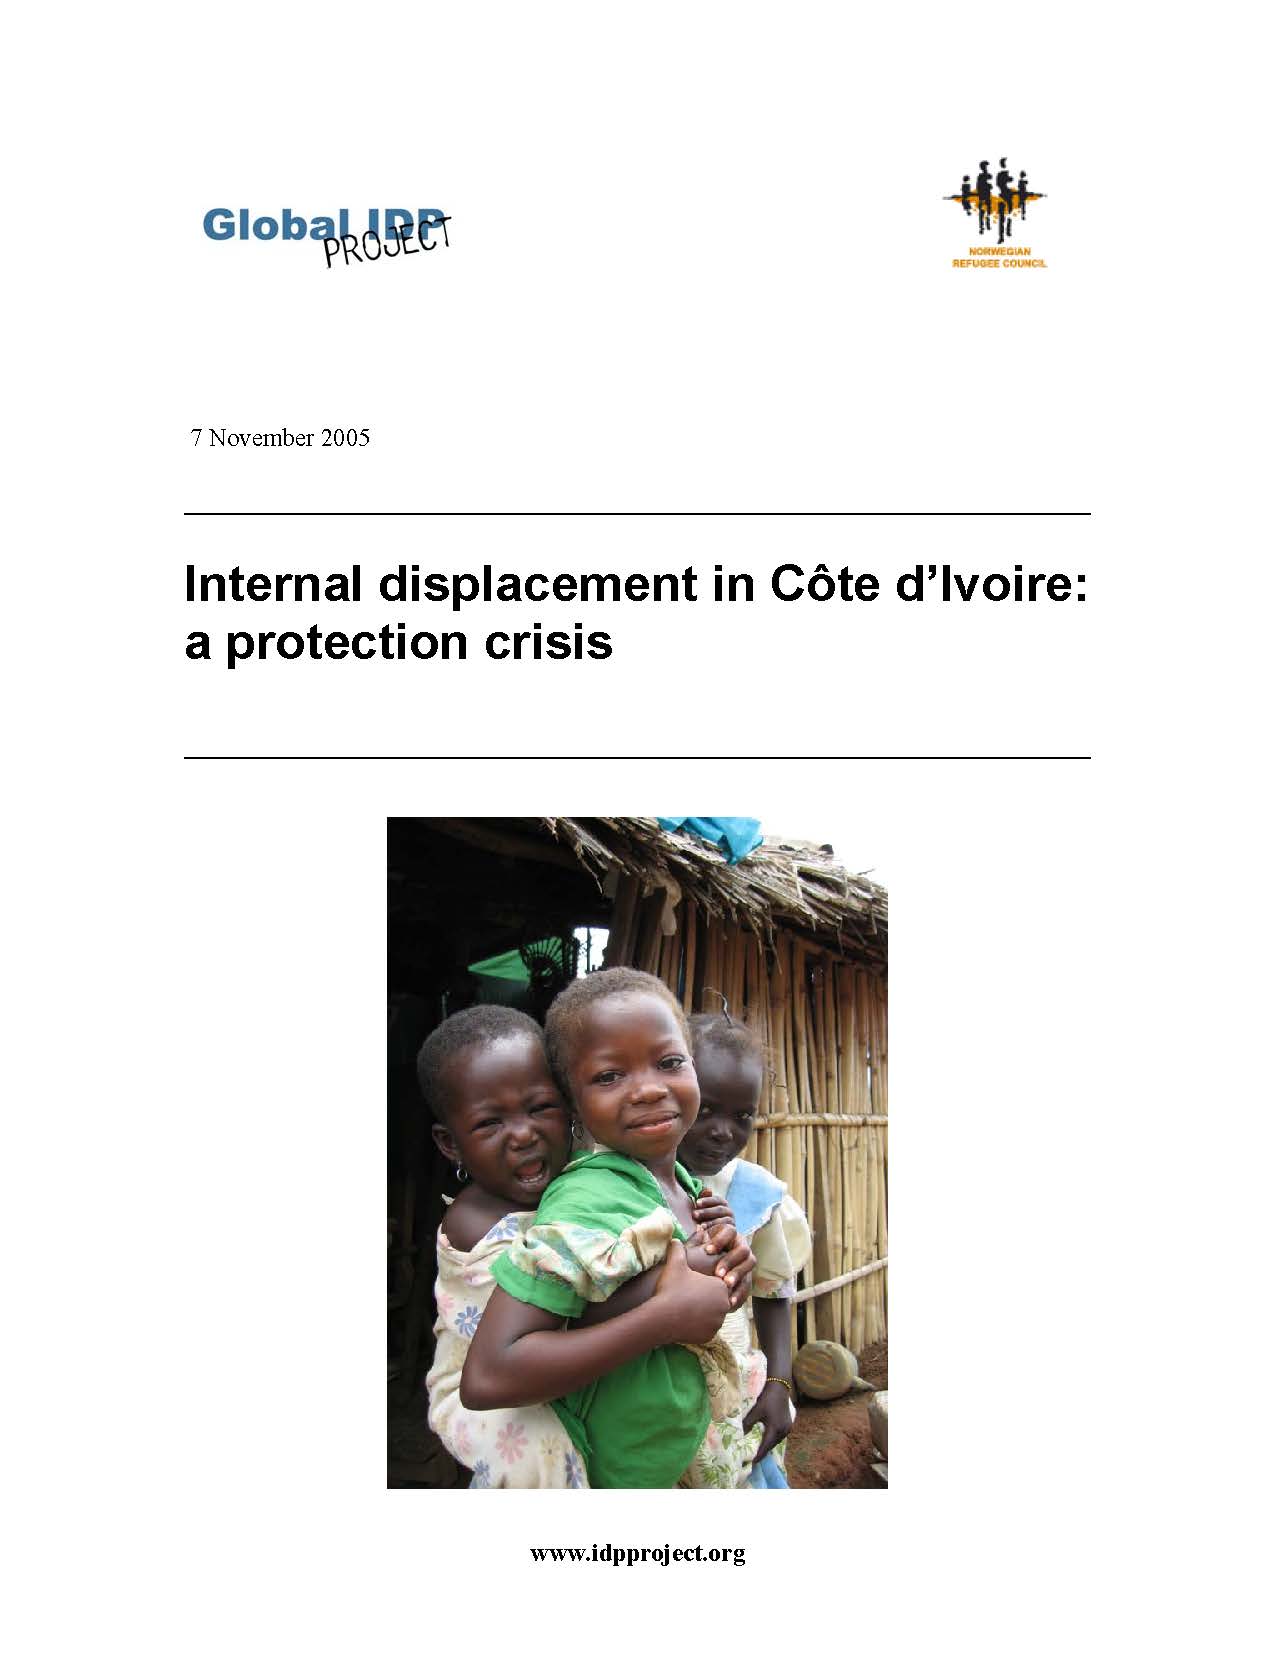 Internal displacement in Côte d'Ivoire: a protection crisis